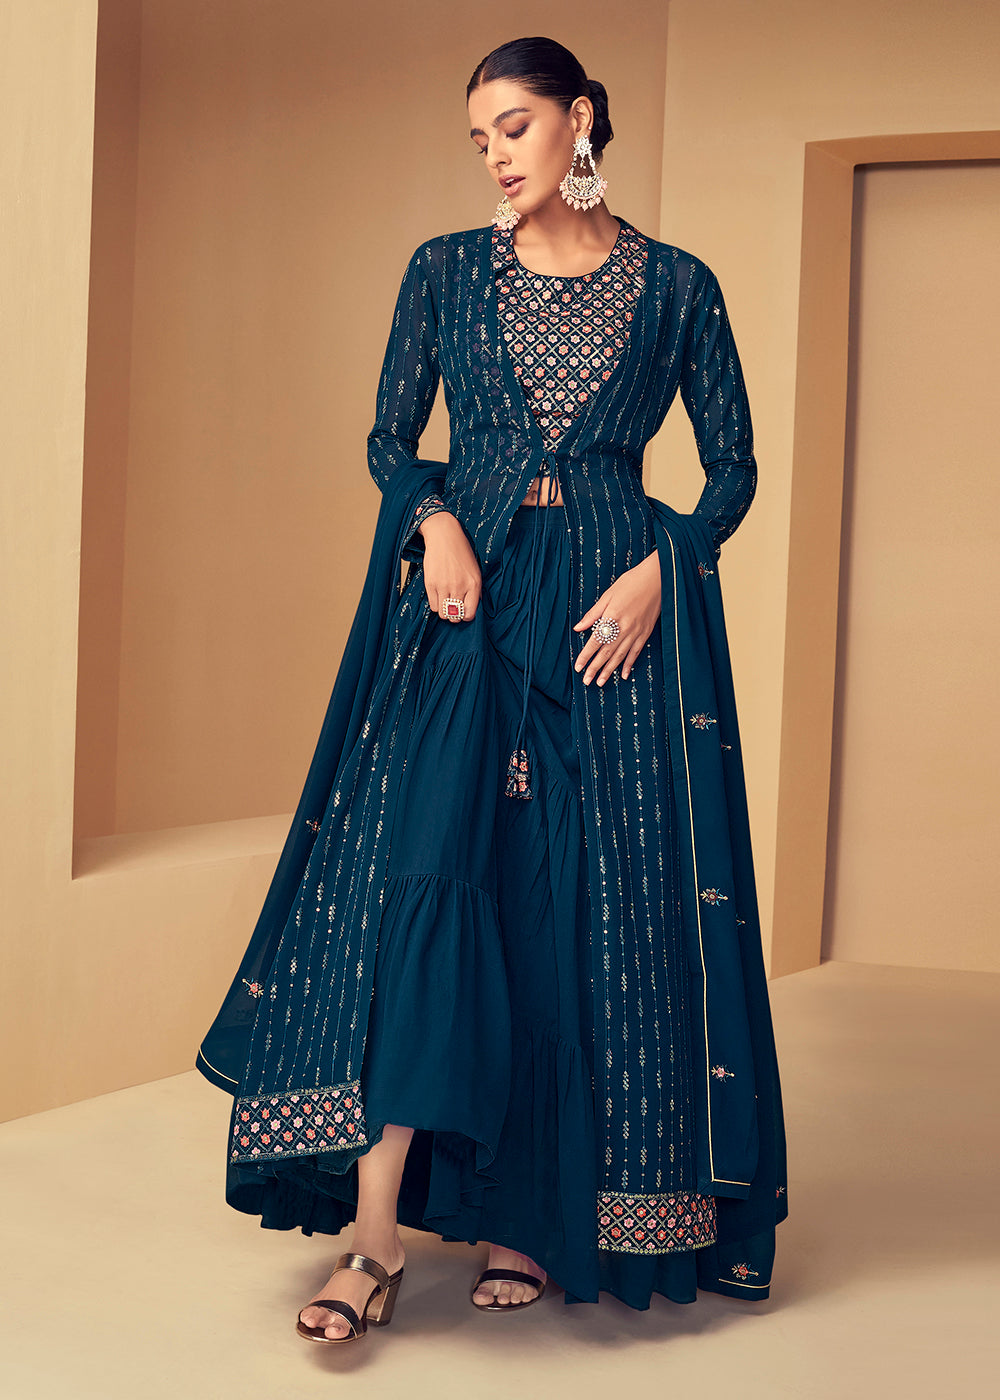 Buy Now Imperial Navy Blue Jacket Style Party Wear Indo Western Dress Online in USA, UK, Canada & Worldwide at Empress Clothing. 